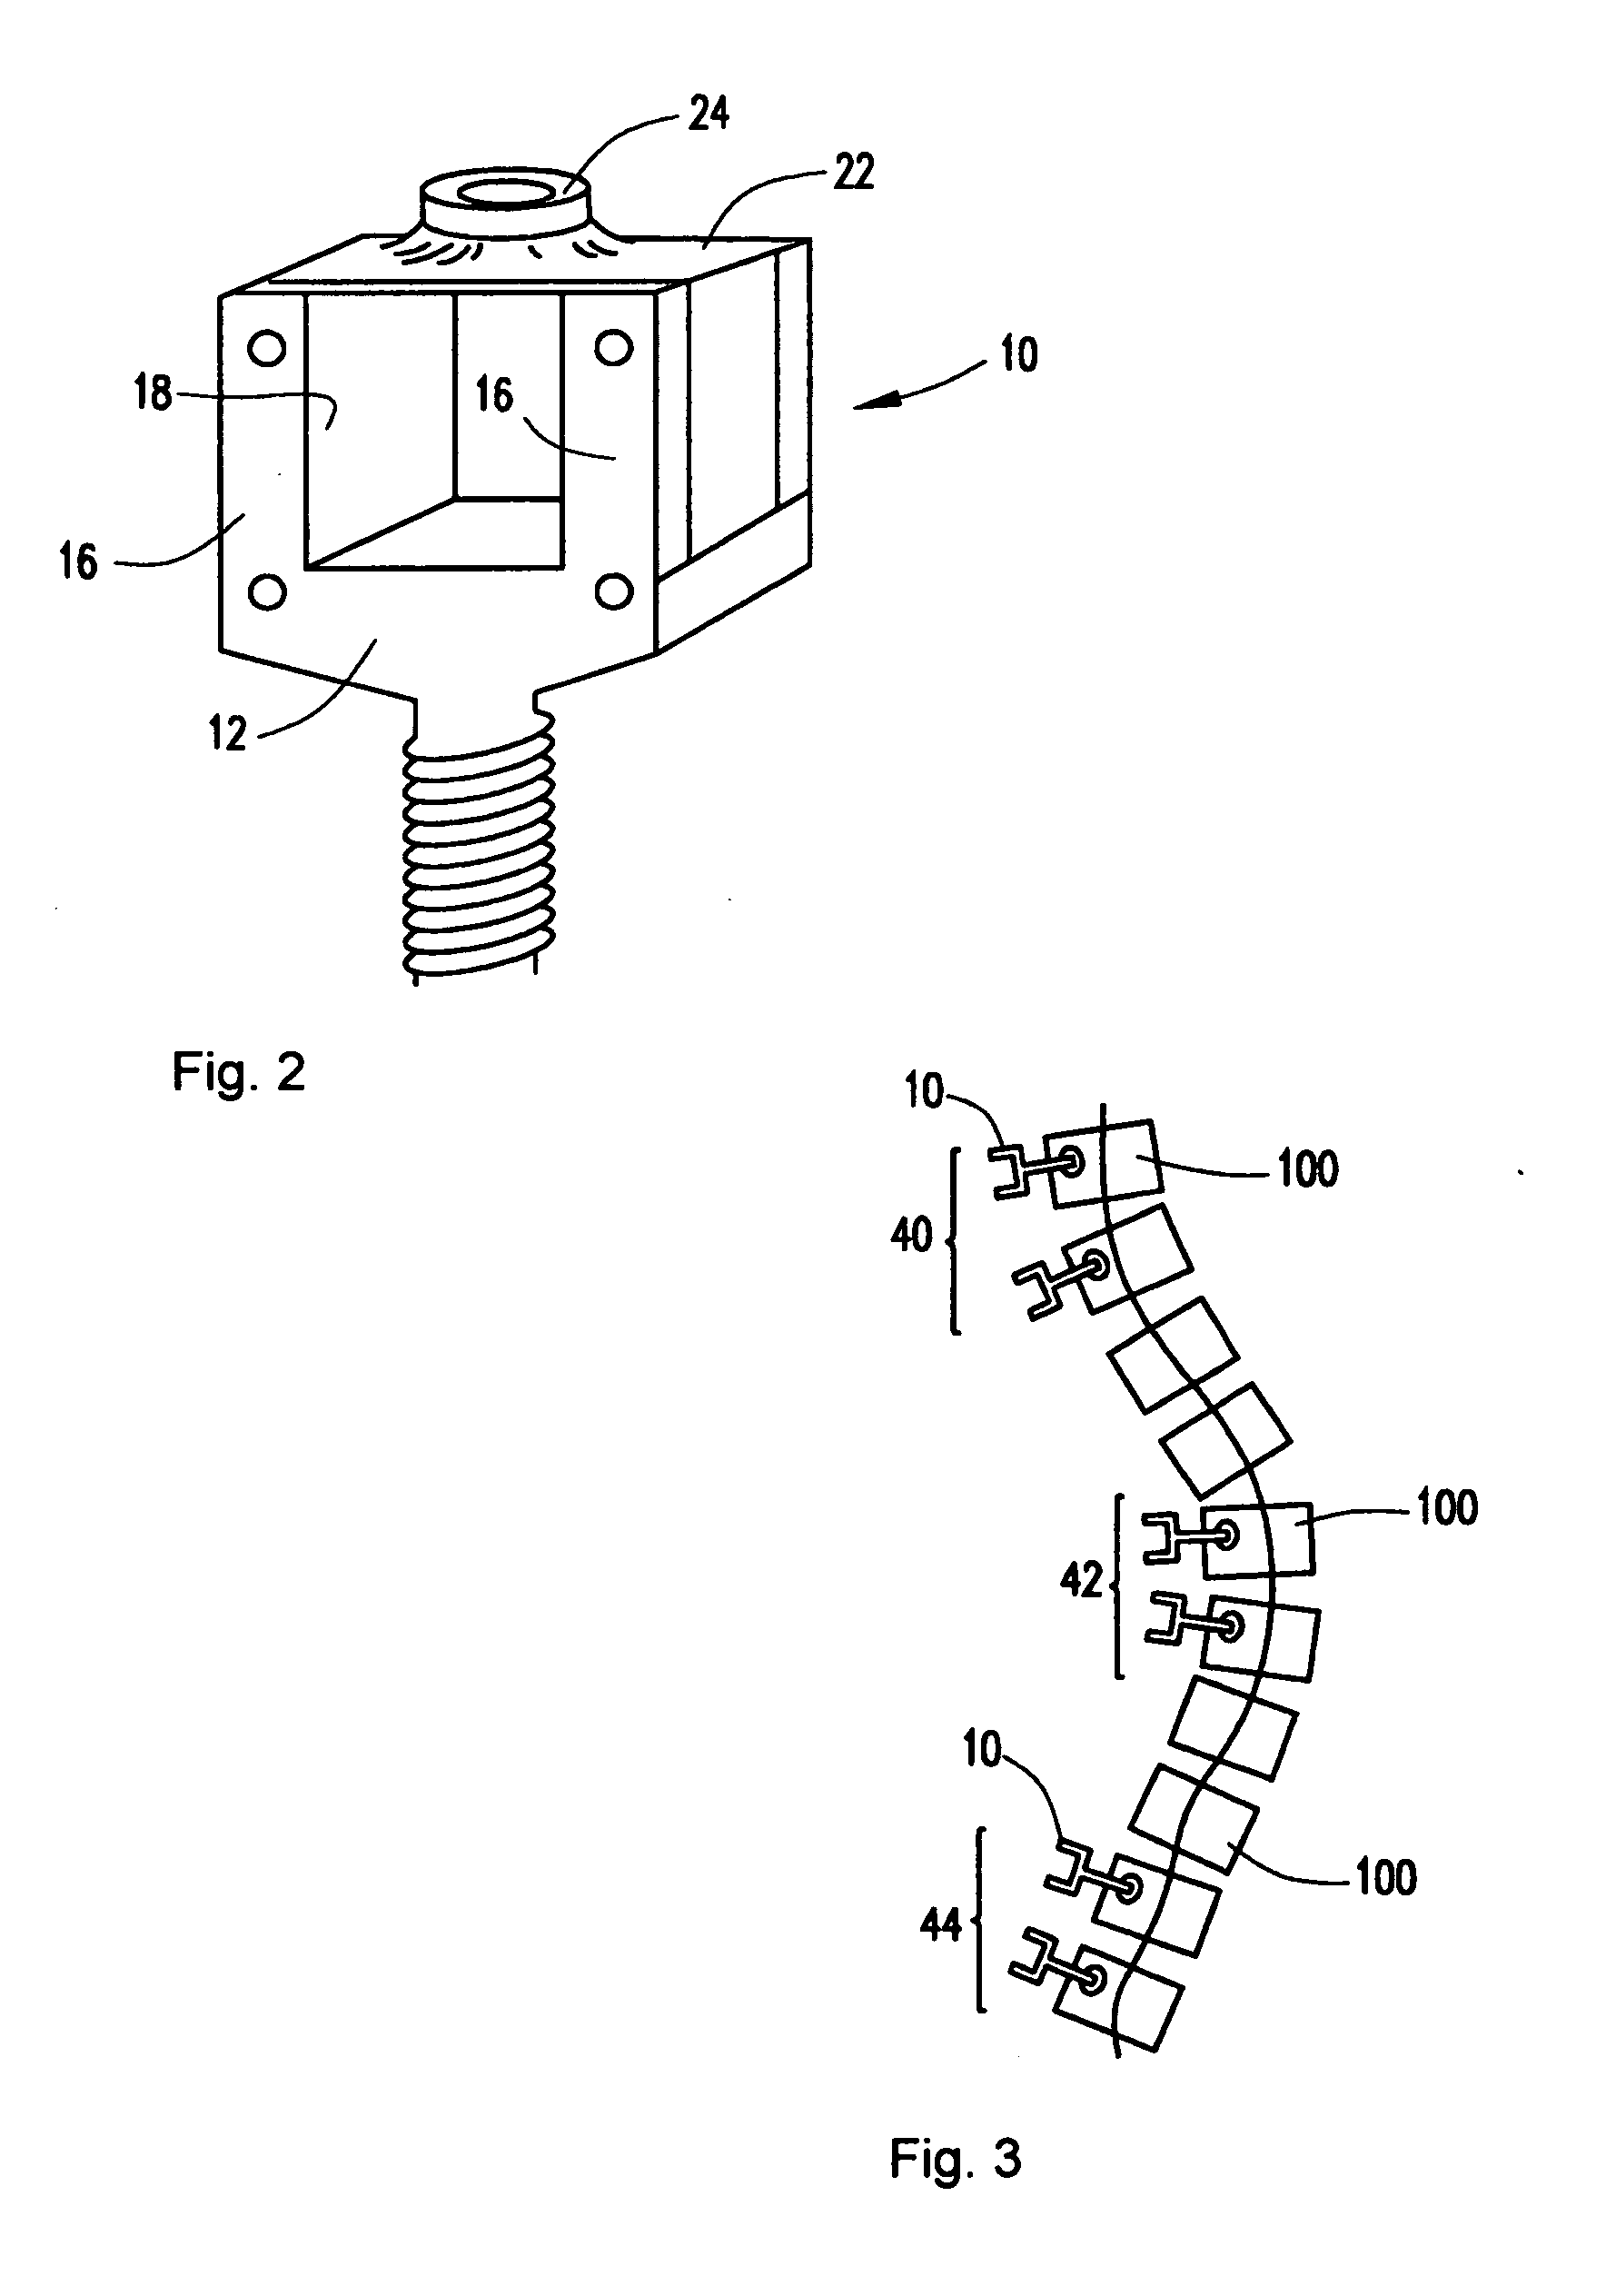 System and method for aligning vertebrae in the amelioration of aberrant spinal column deviation condition in patients requiring the accomodation of spinal column growth or elongation